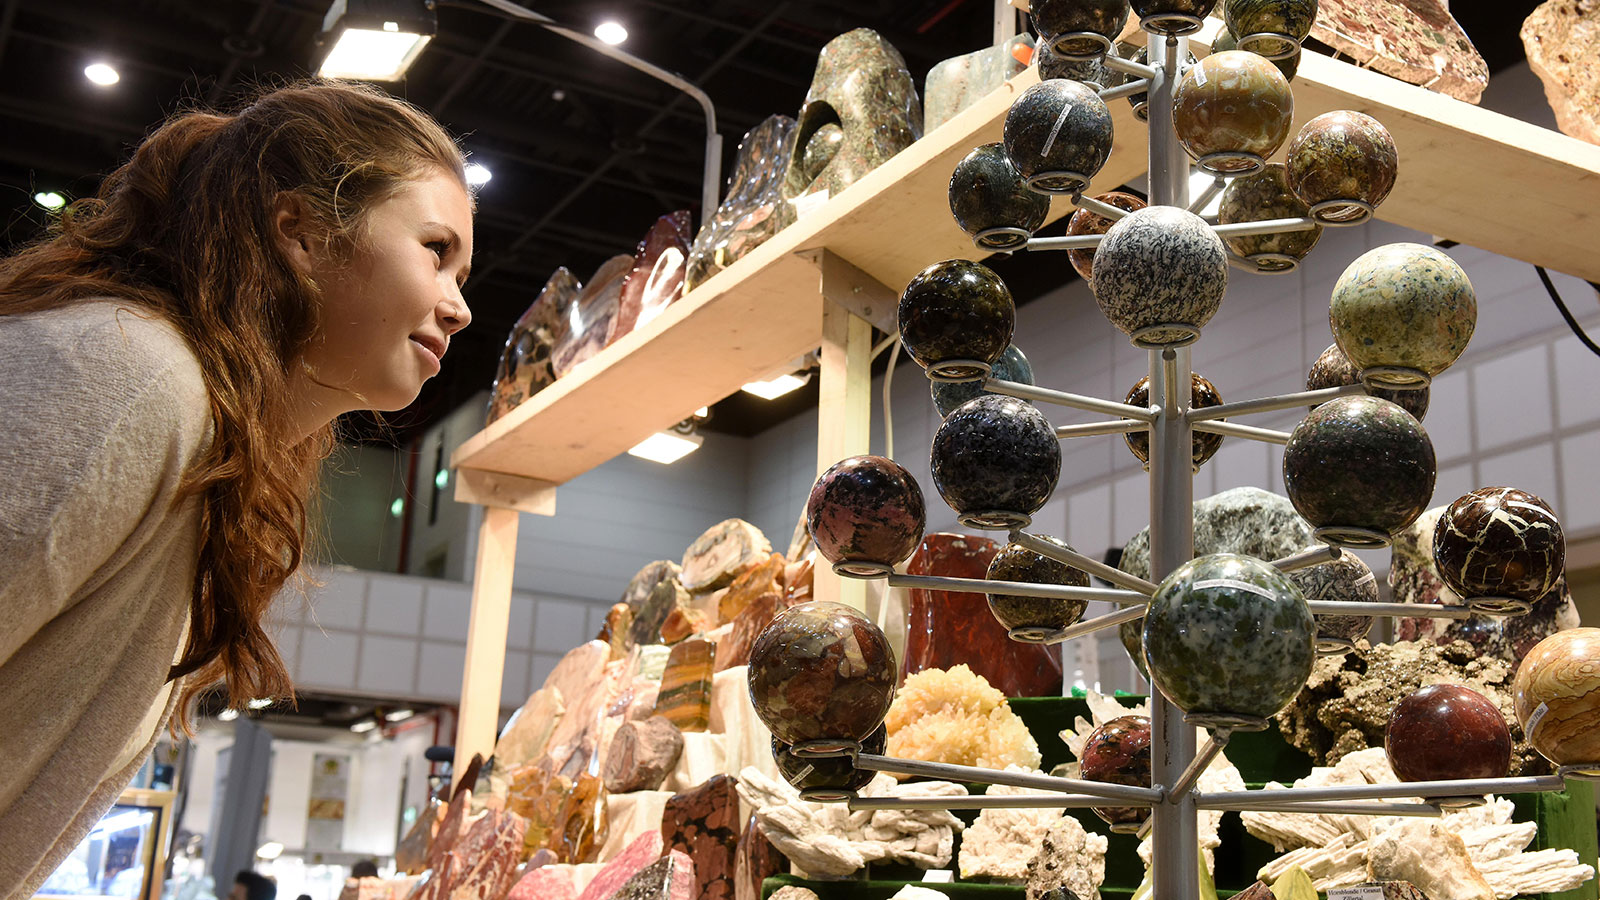 A female visitor standing in front of minerals at the Mineralien Hamburg trade show in the Hamburg exhibition halls